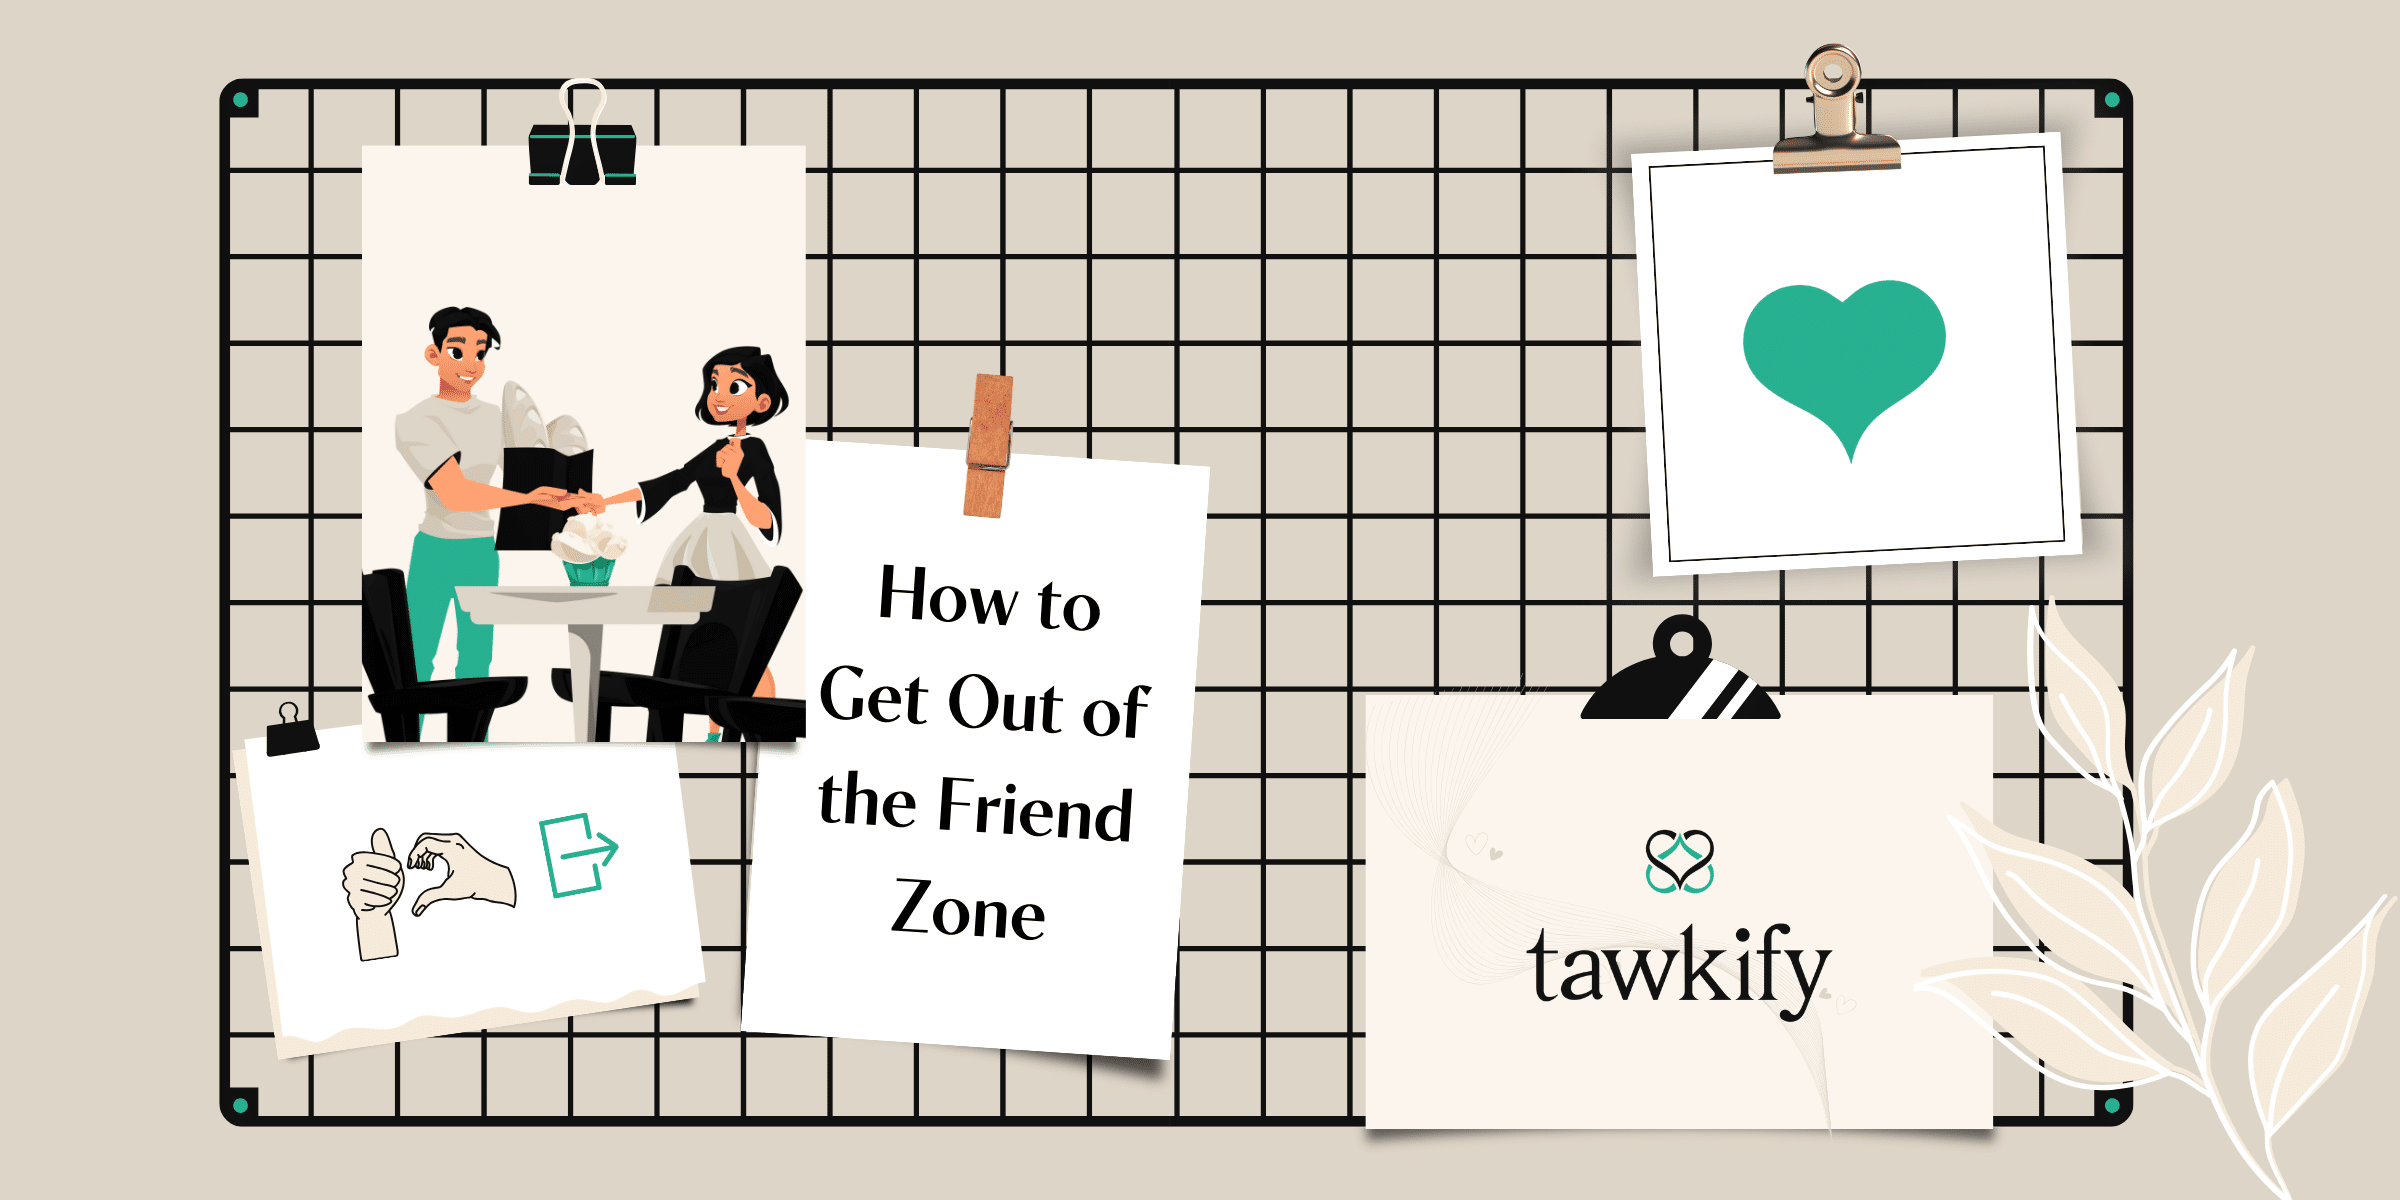 Don’t get stuck in the friend zone. Learn how to get out of the friend zone with this helpful guide, plus tips for different scenarios—because every friendship is different.